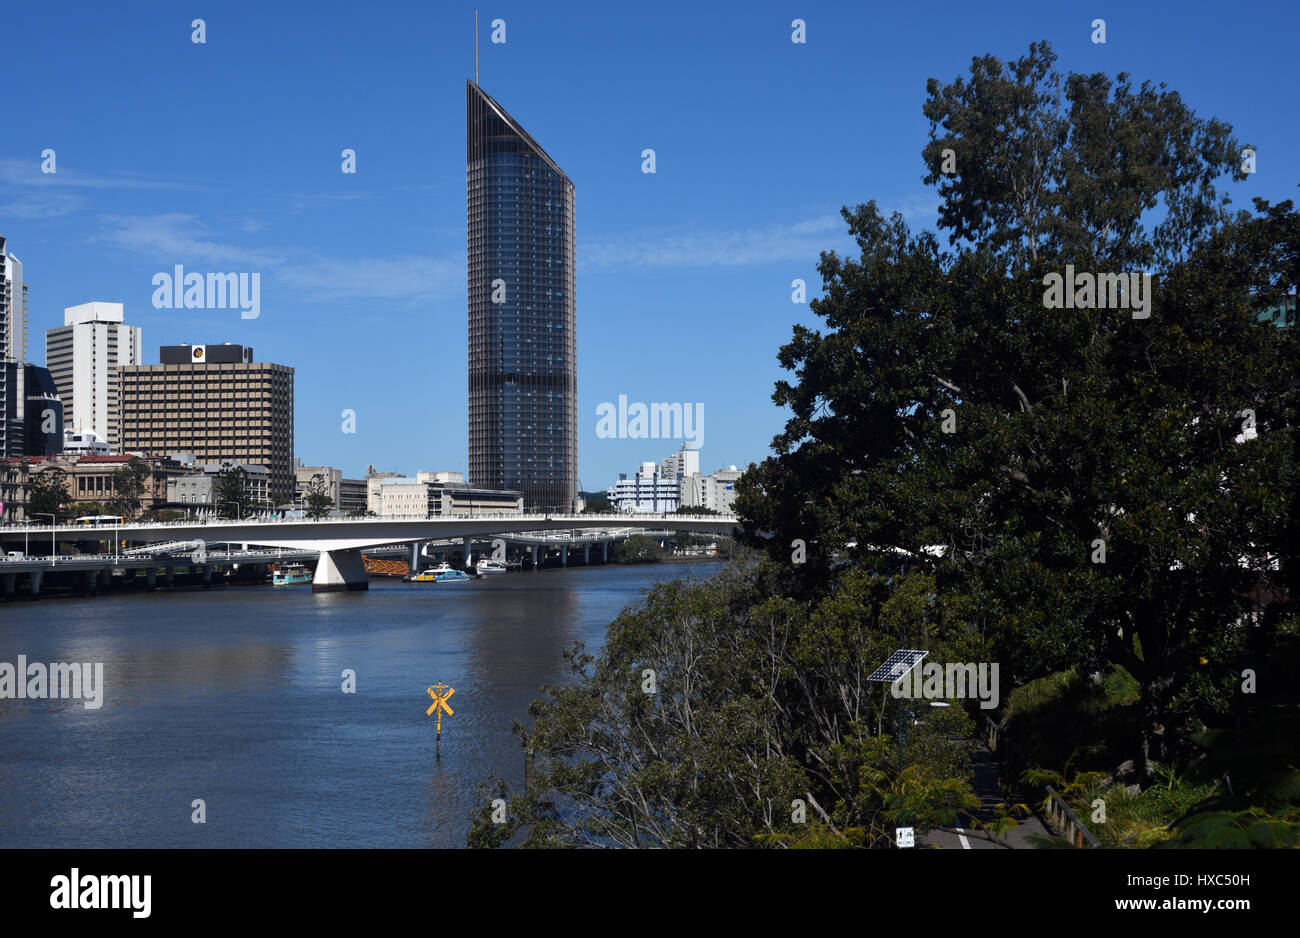 Brisbane, Australia: Old (left) and new (right) Queensland state government buildings overlooking Brisbane River and Victoria Bridge. Stock Photo